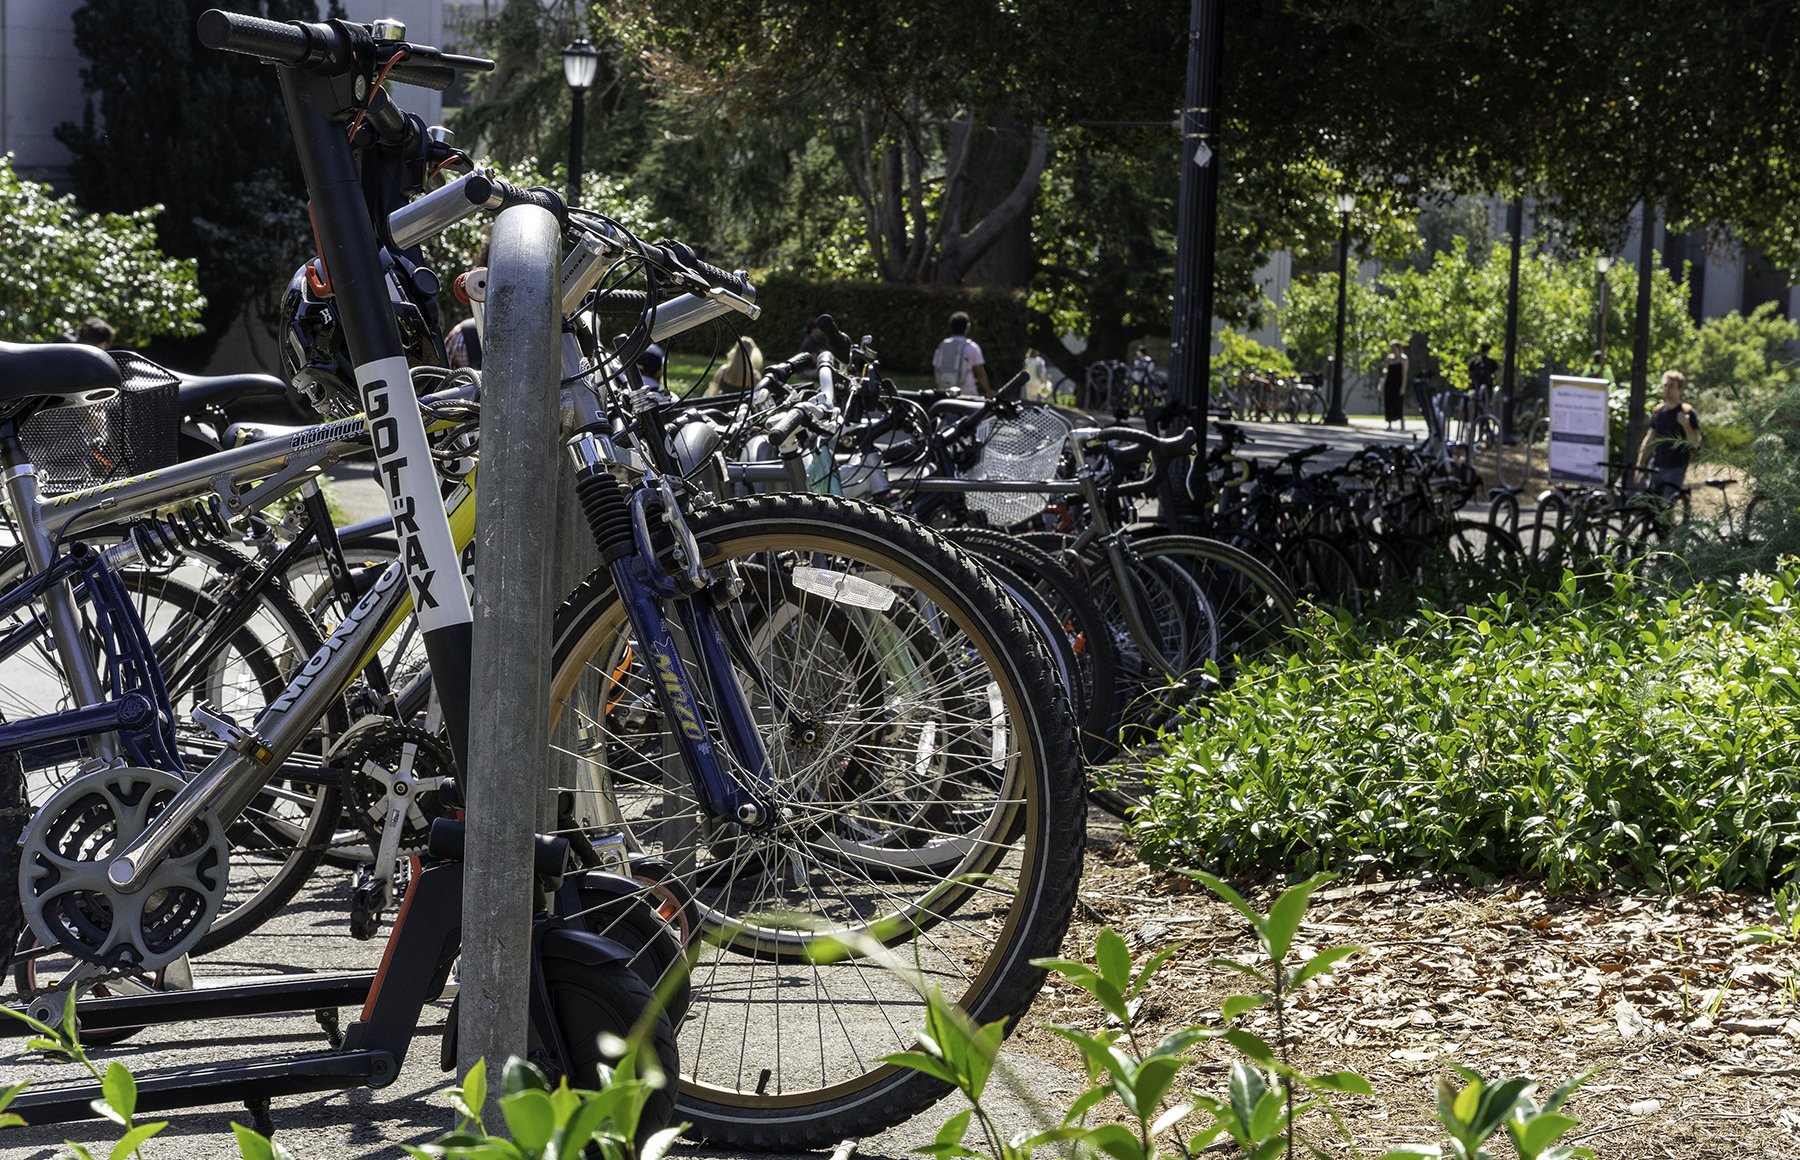 A chain reaction: We need to talk about bike theft